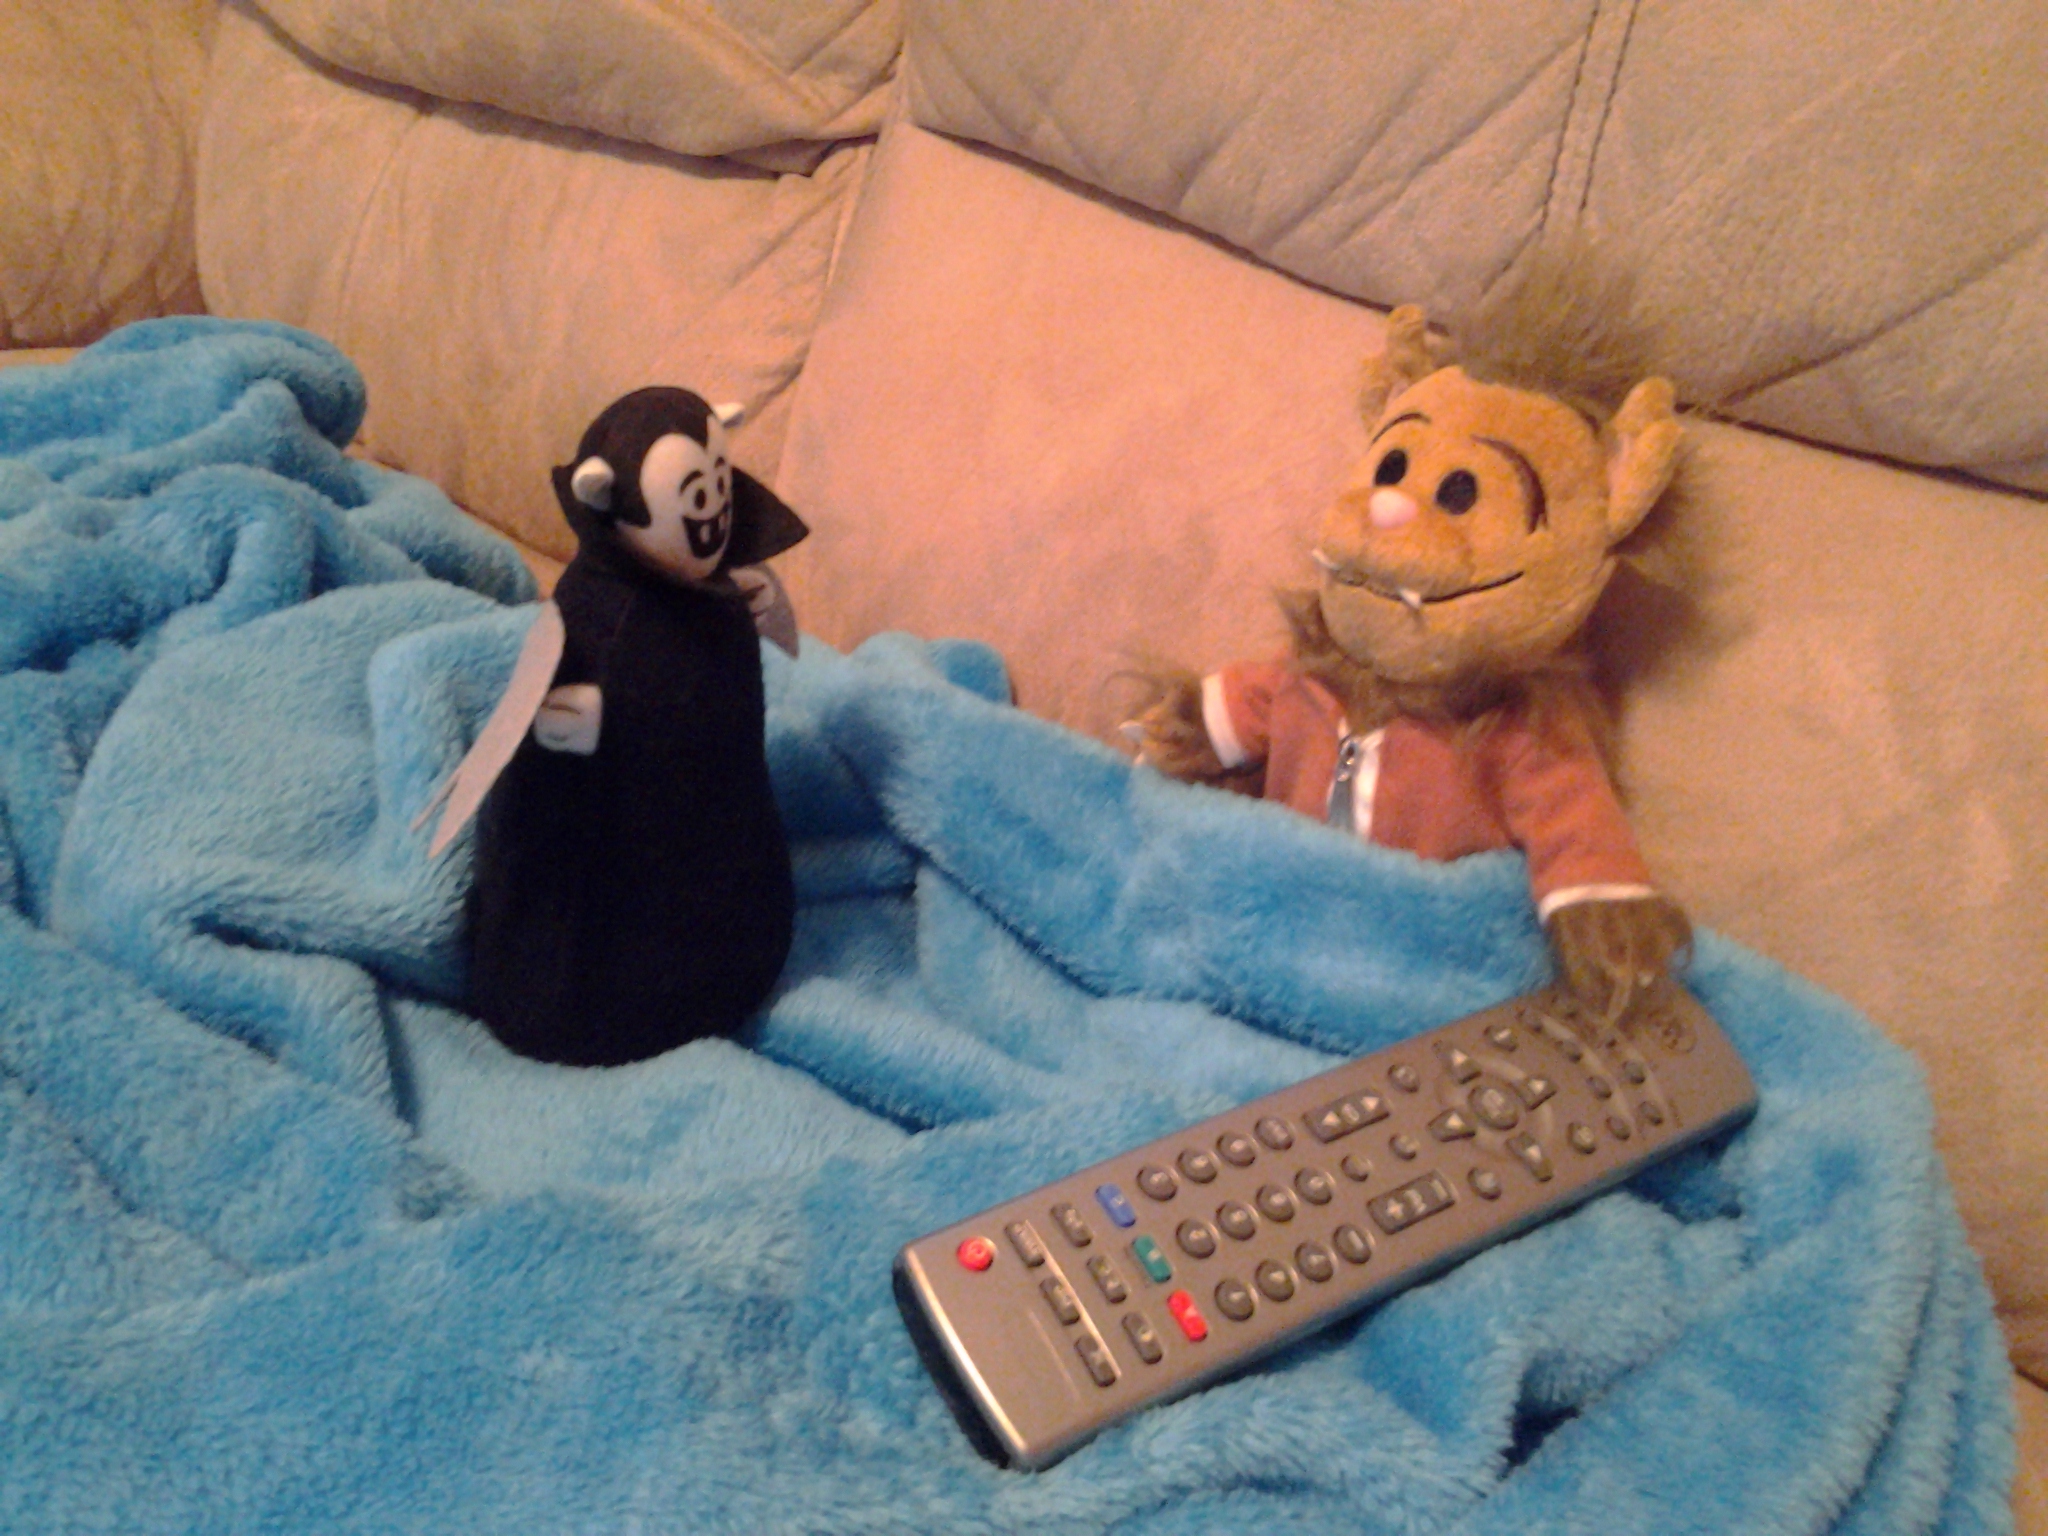 Photo by Linda Ratliff of a Wolfie plush toy and a Little Vampire plush toy sitting on a couch with a blanket and a television remote control